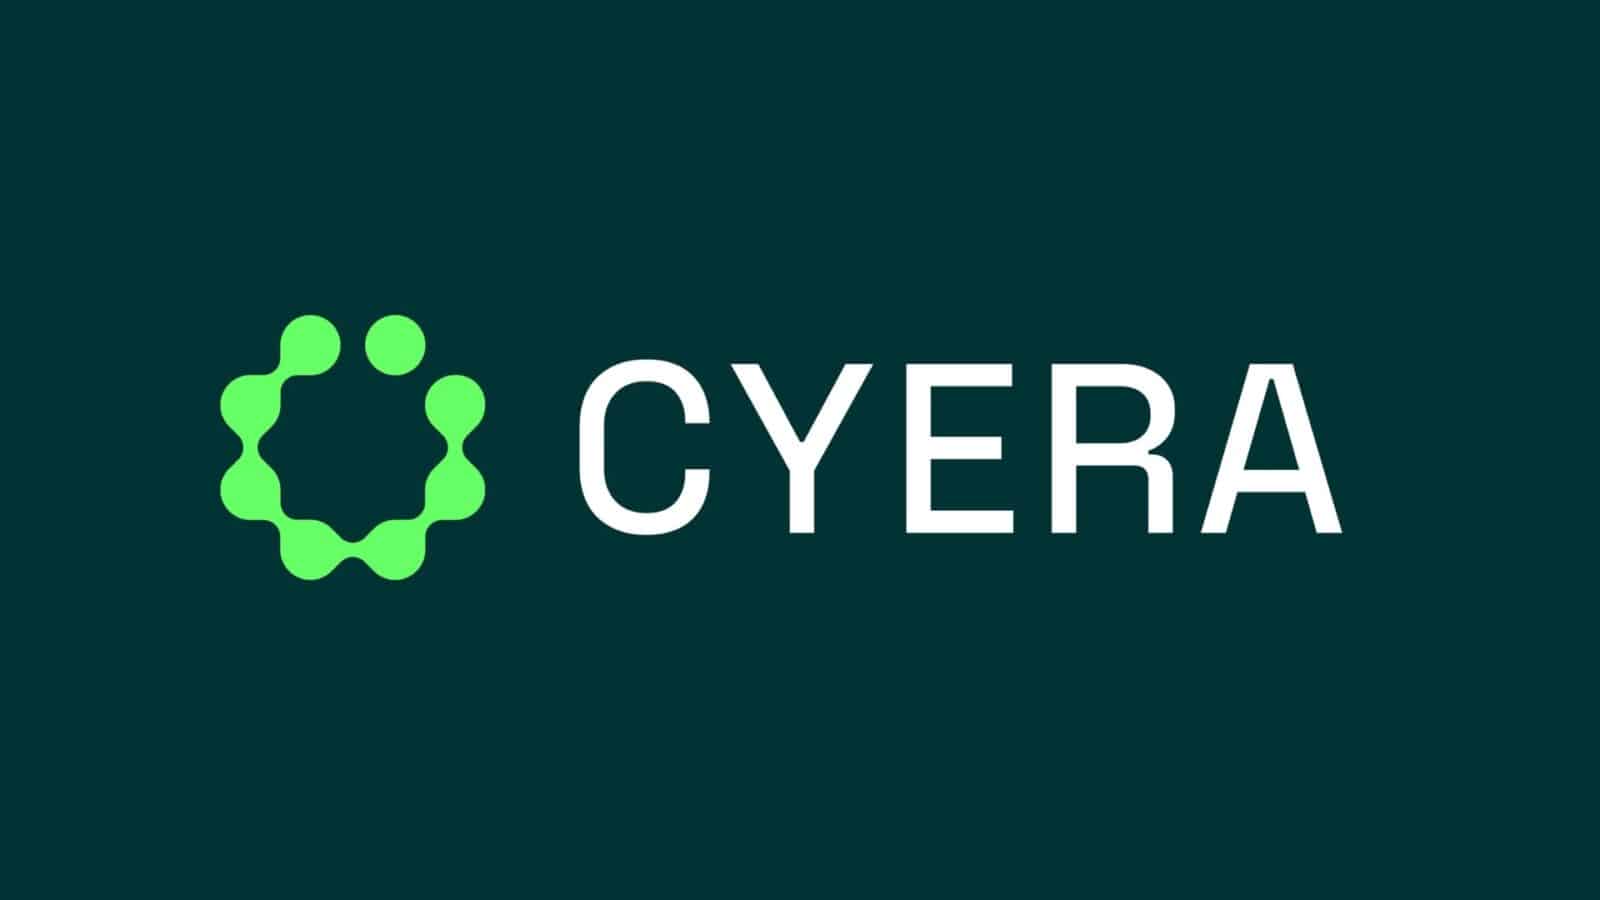 AI-Powered Data Security Firm Cyera Raises 0M in Accel-led Series B Funding Round